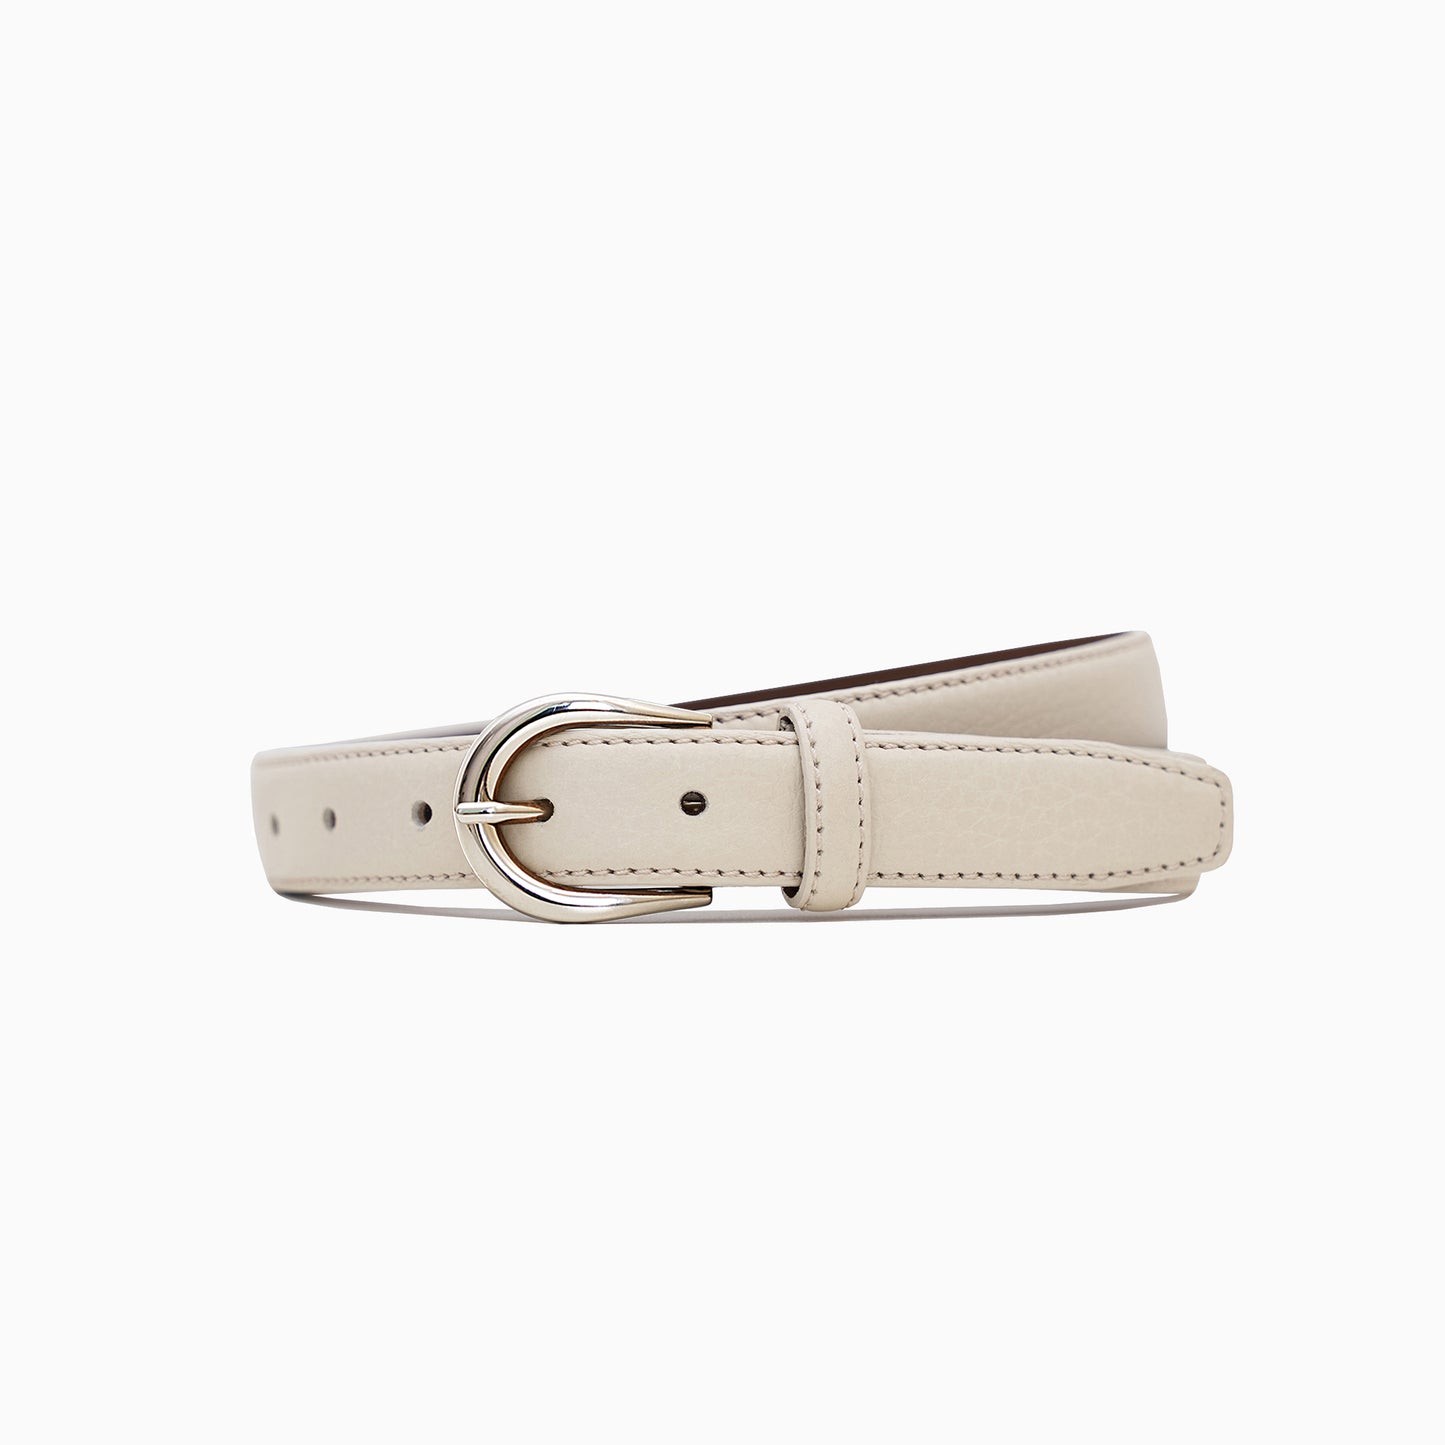 Off-White Pebbled Leather 1" Belt